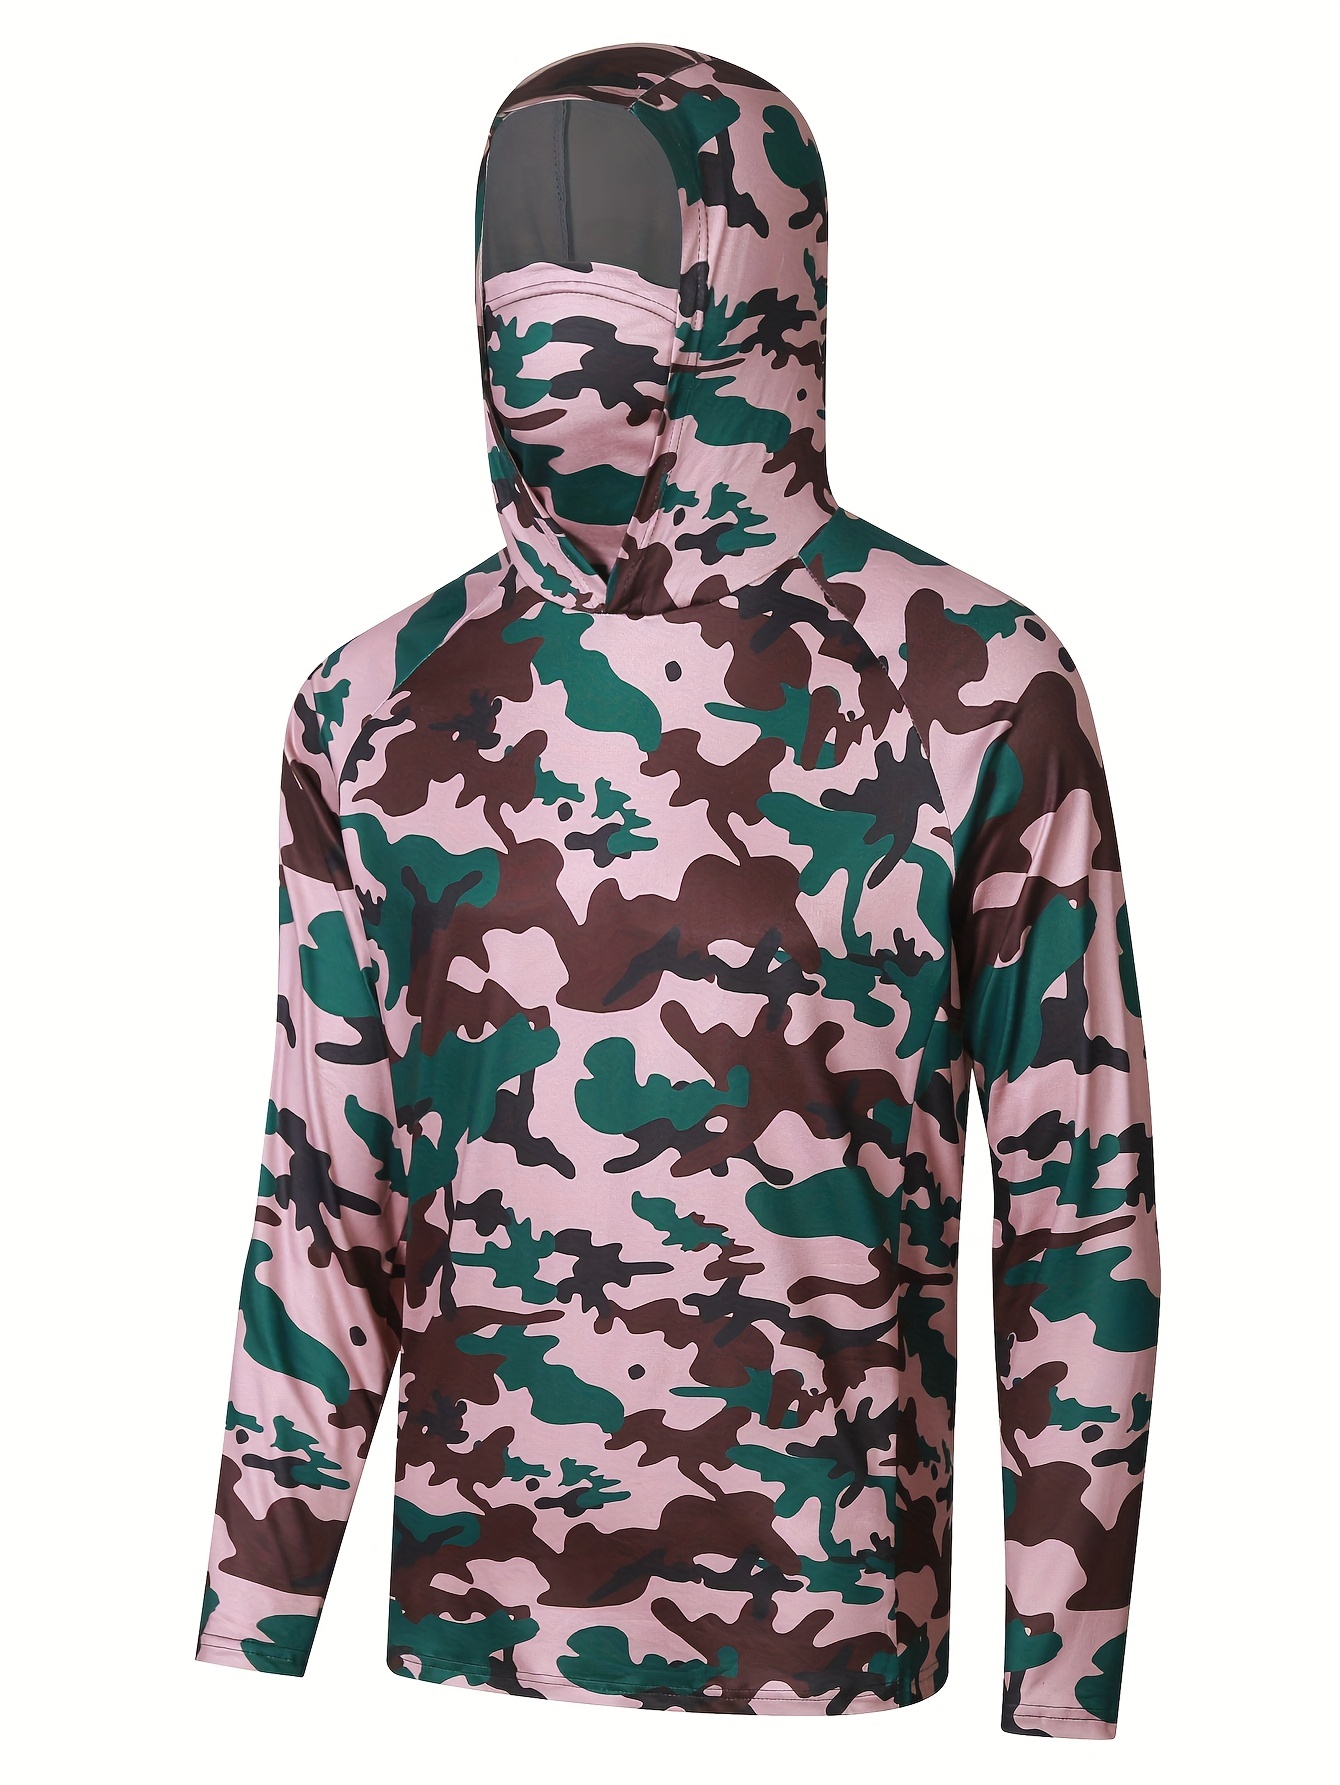 Men's Upf 50+ Sun Protection Camouflage Hooded Sweatshirts, Quick Dry Long Sleeve Rash Guard Hoodie For Fishing Hiking Outdoor